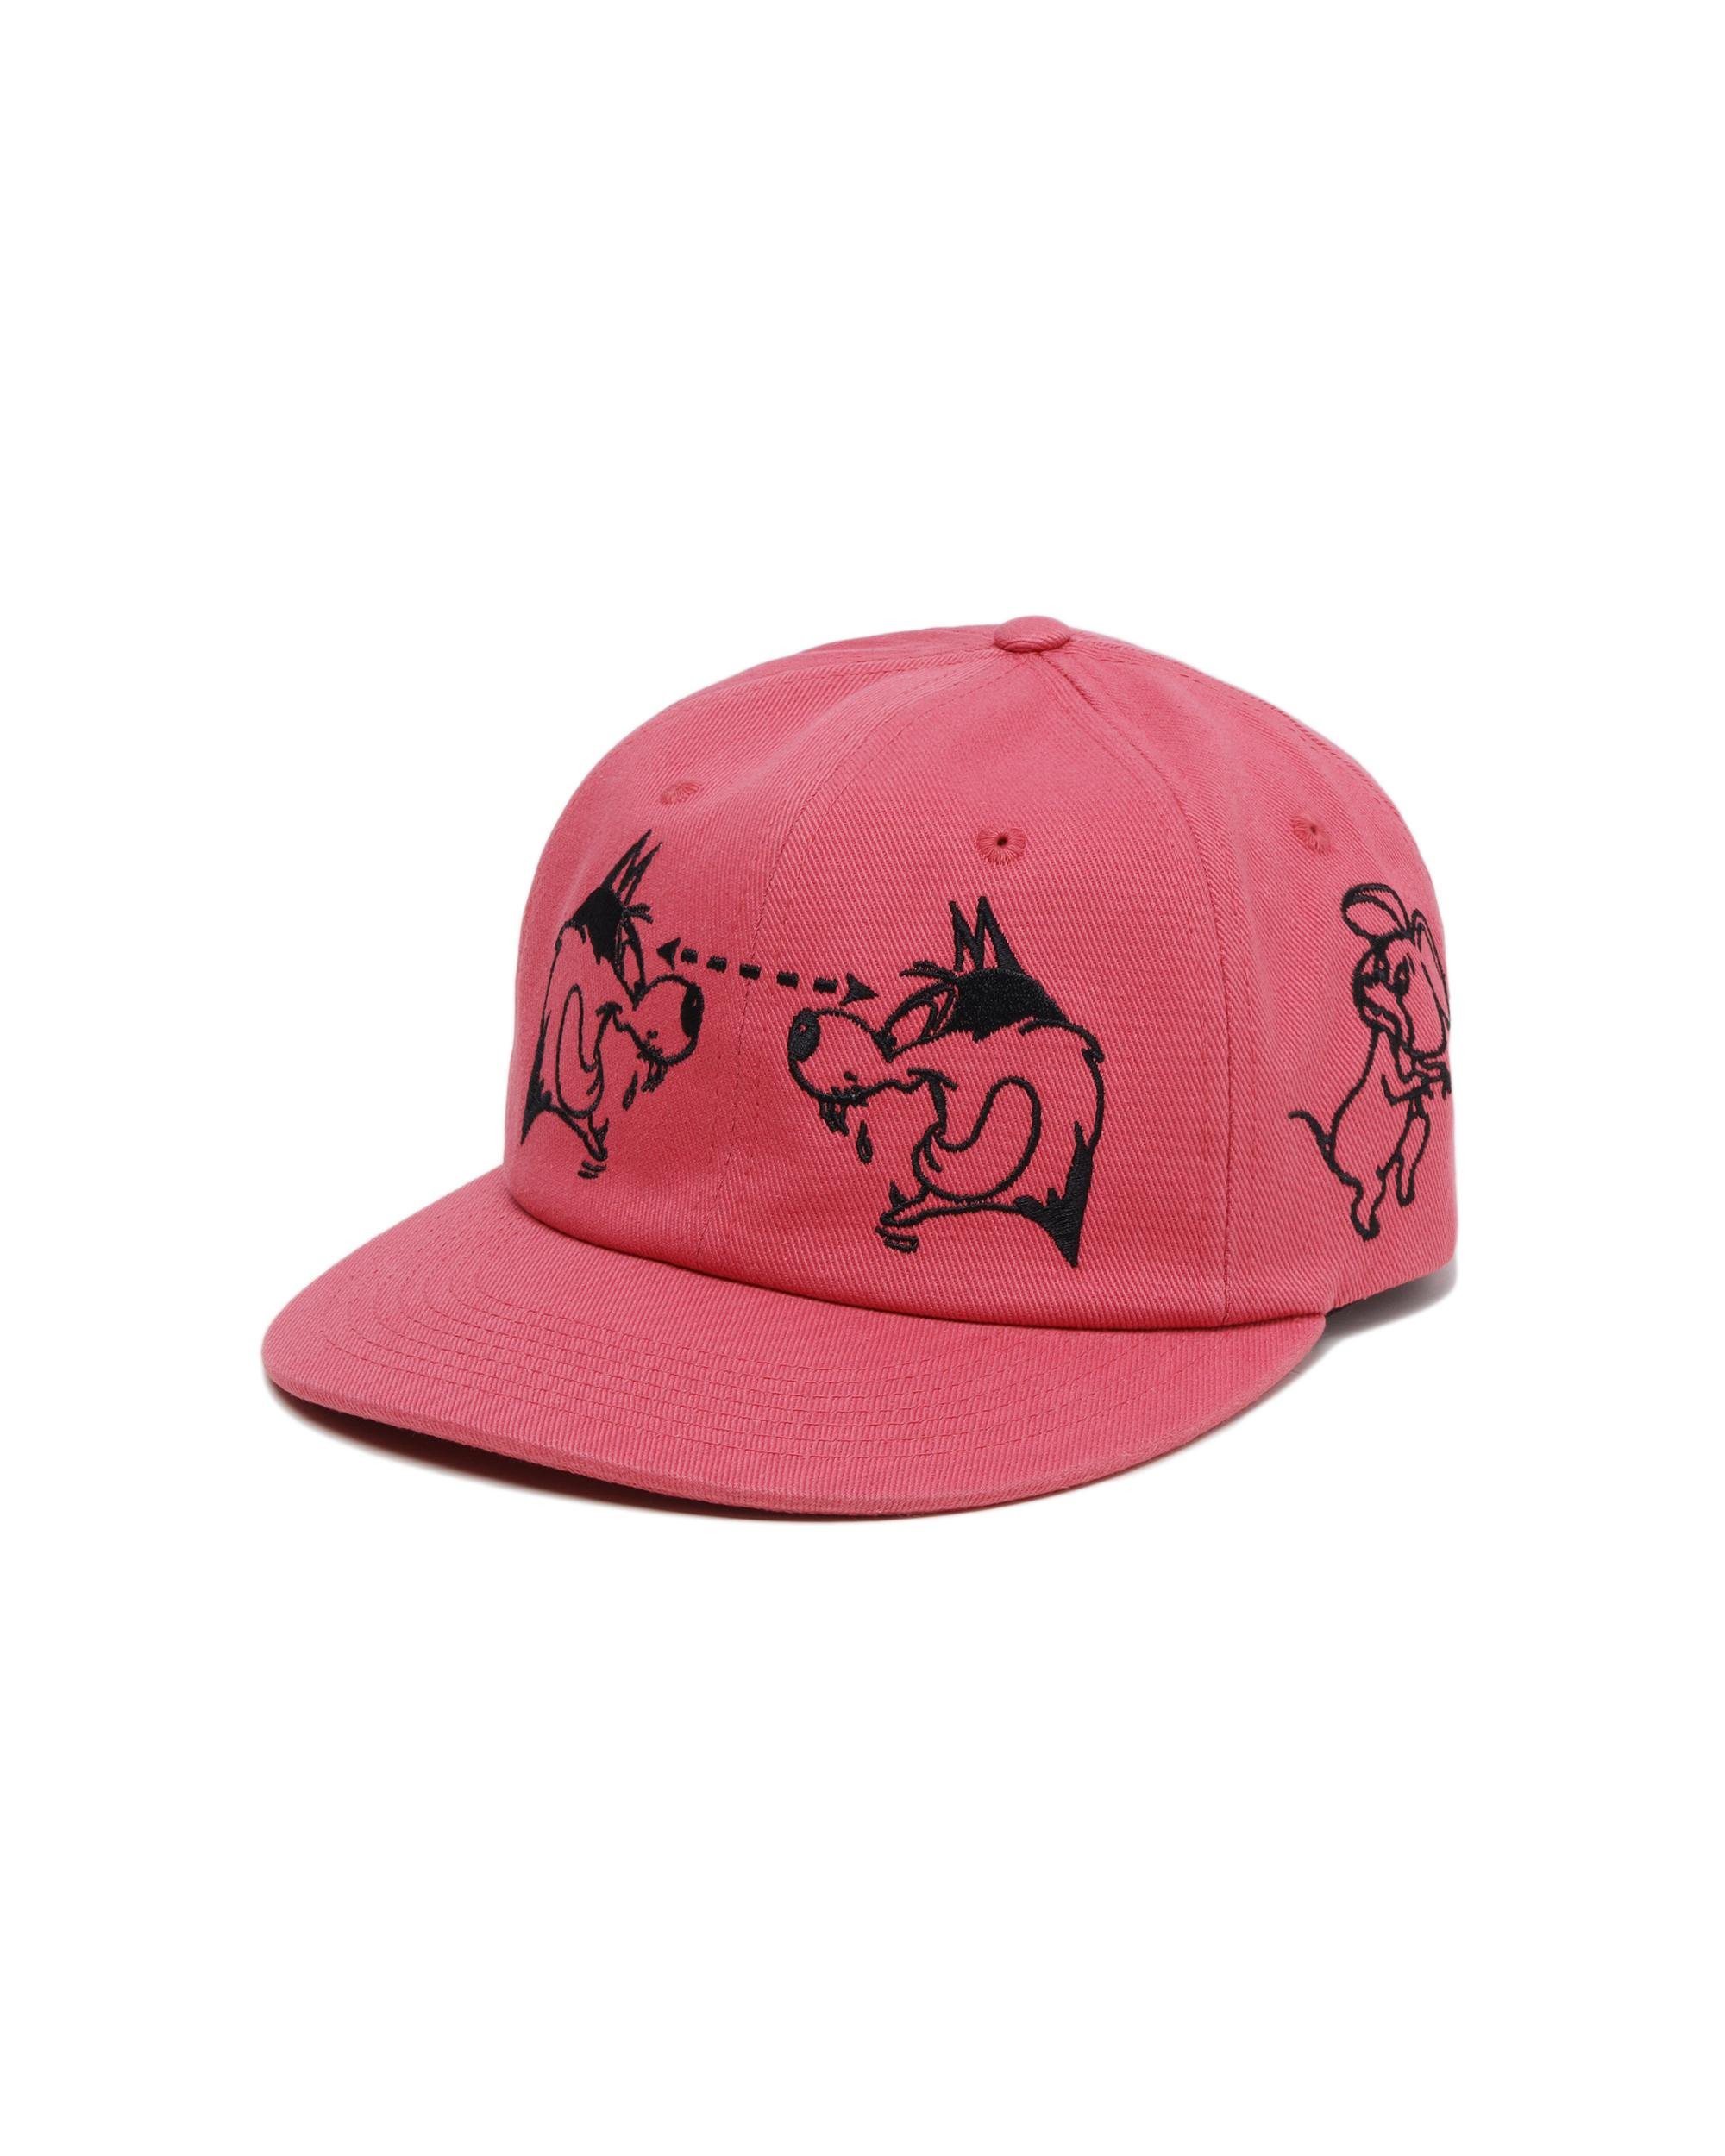 Embroidered cap by CAV EMPT